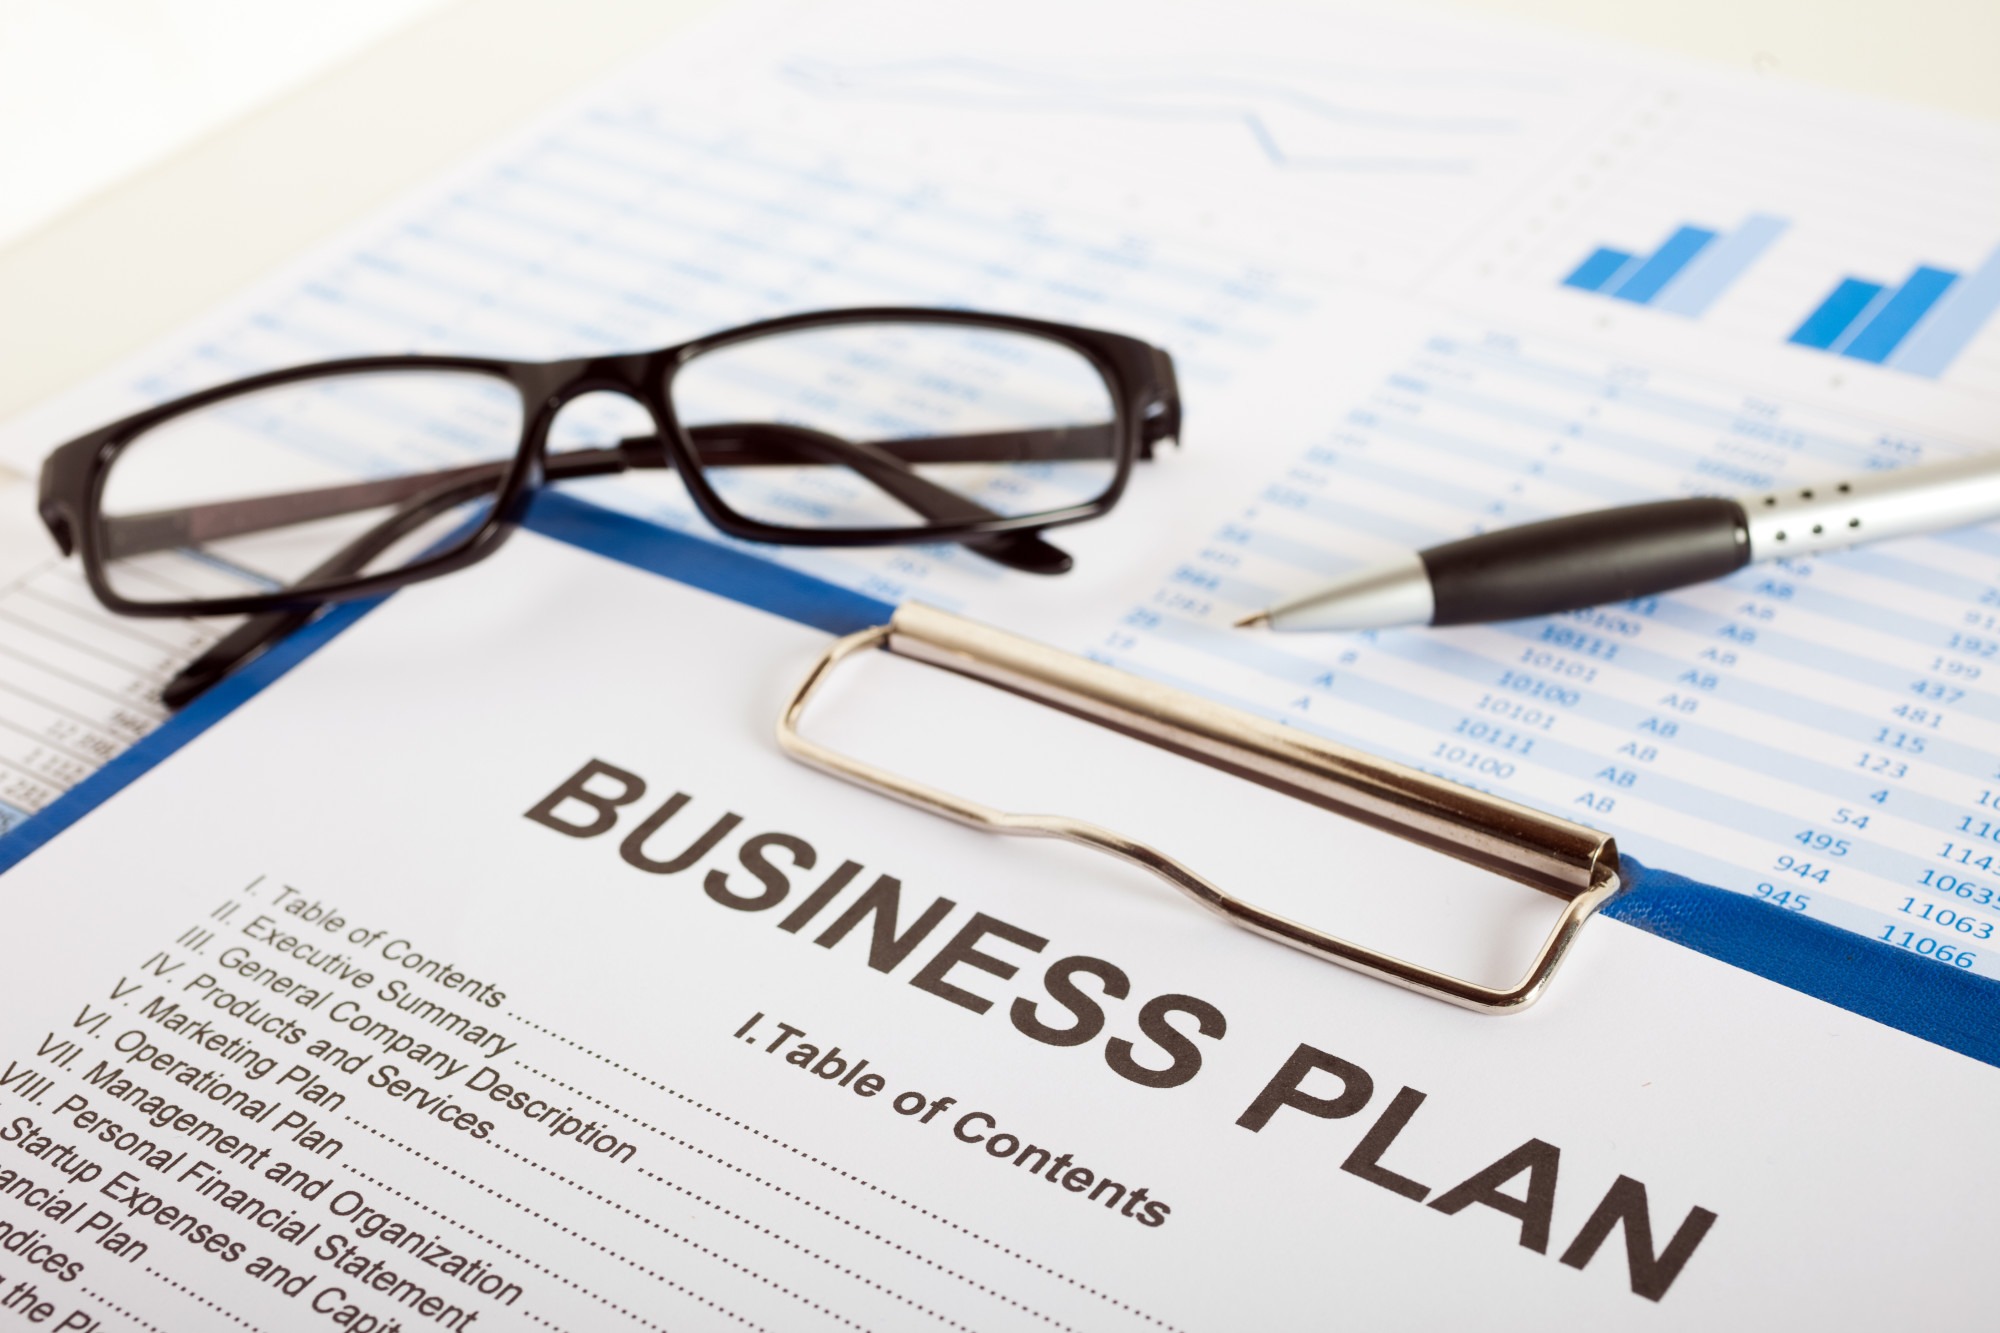 Why is a business plan important